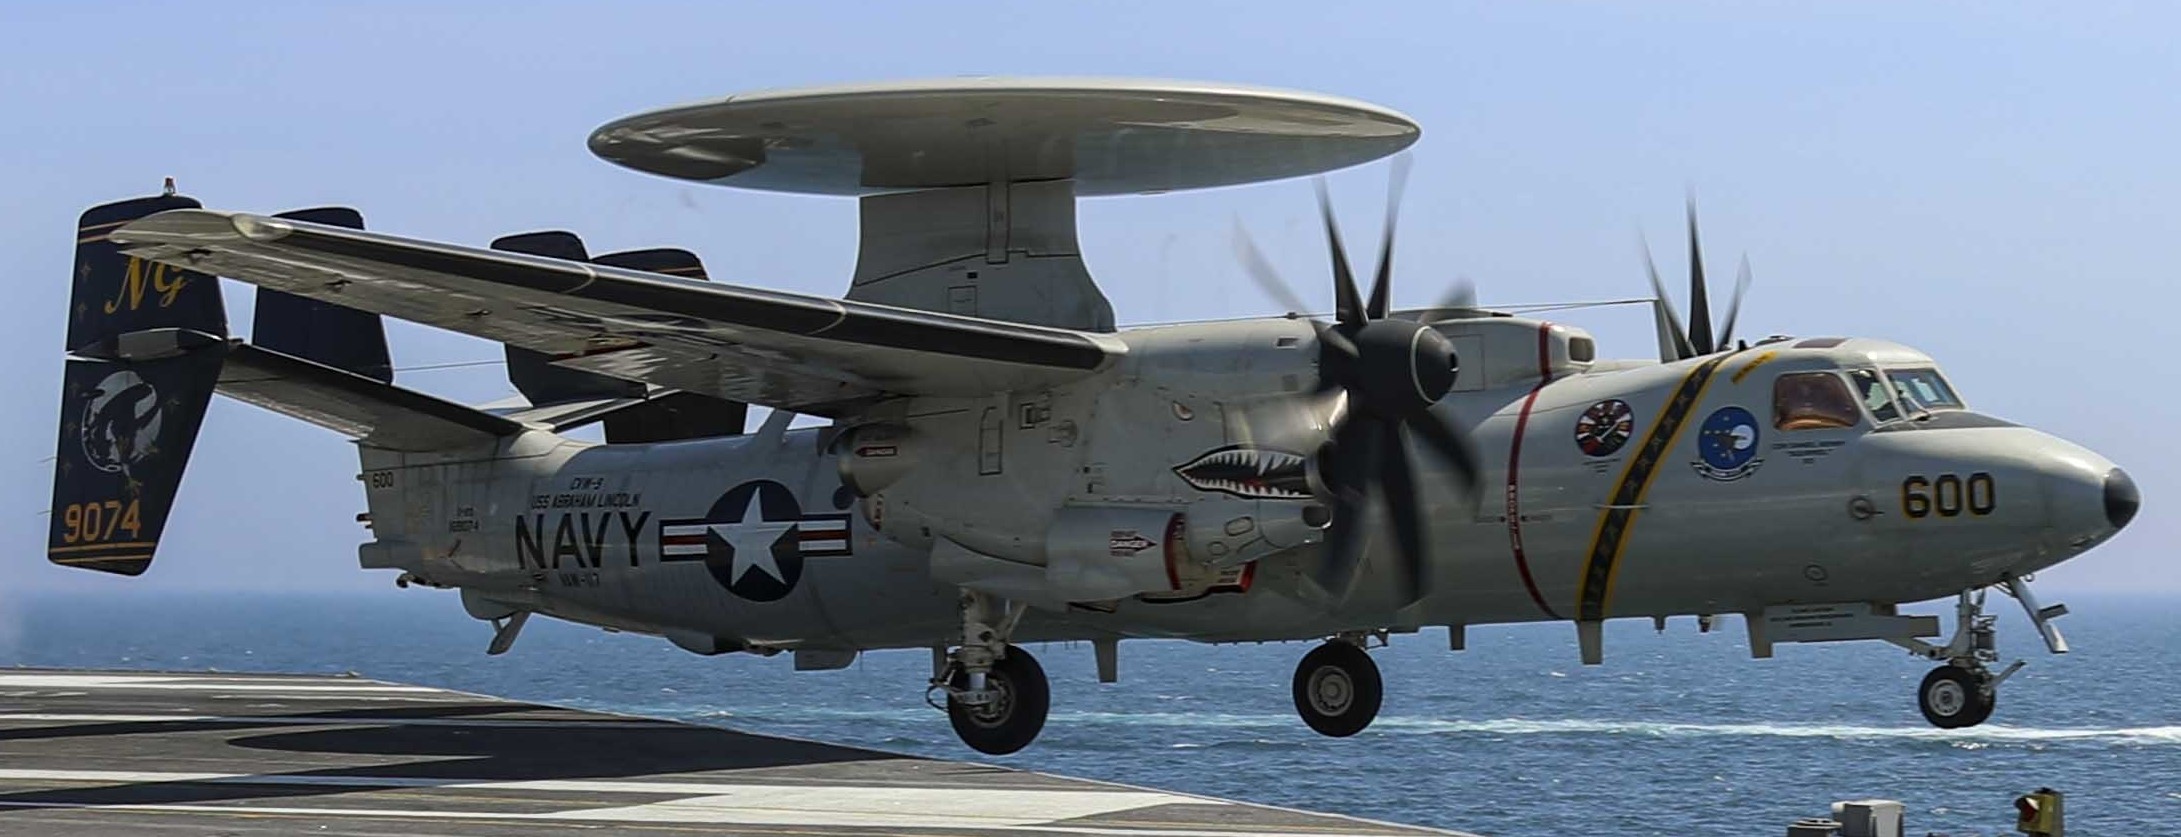 vaw-117 wallbangers airborne command and control squadron navy e-2d hawkeye cvw-9 uss abraham lincoln cvn-72 24